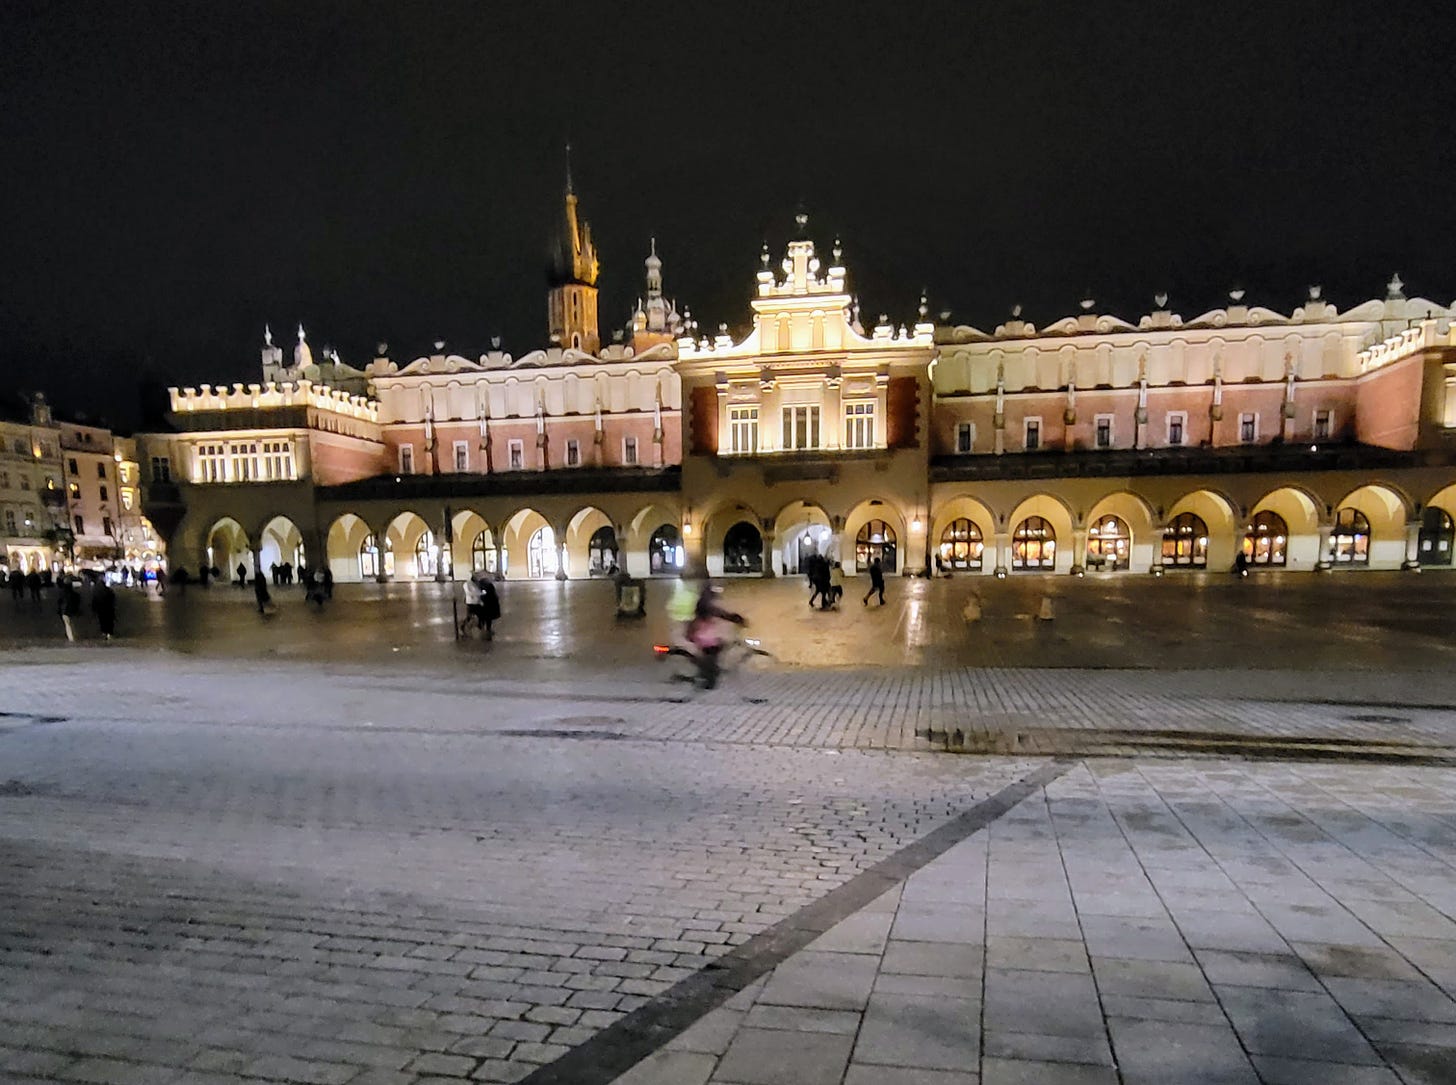 View of Krakow's Cloth Hall at night.